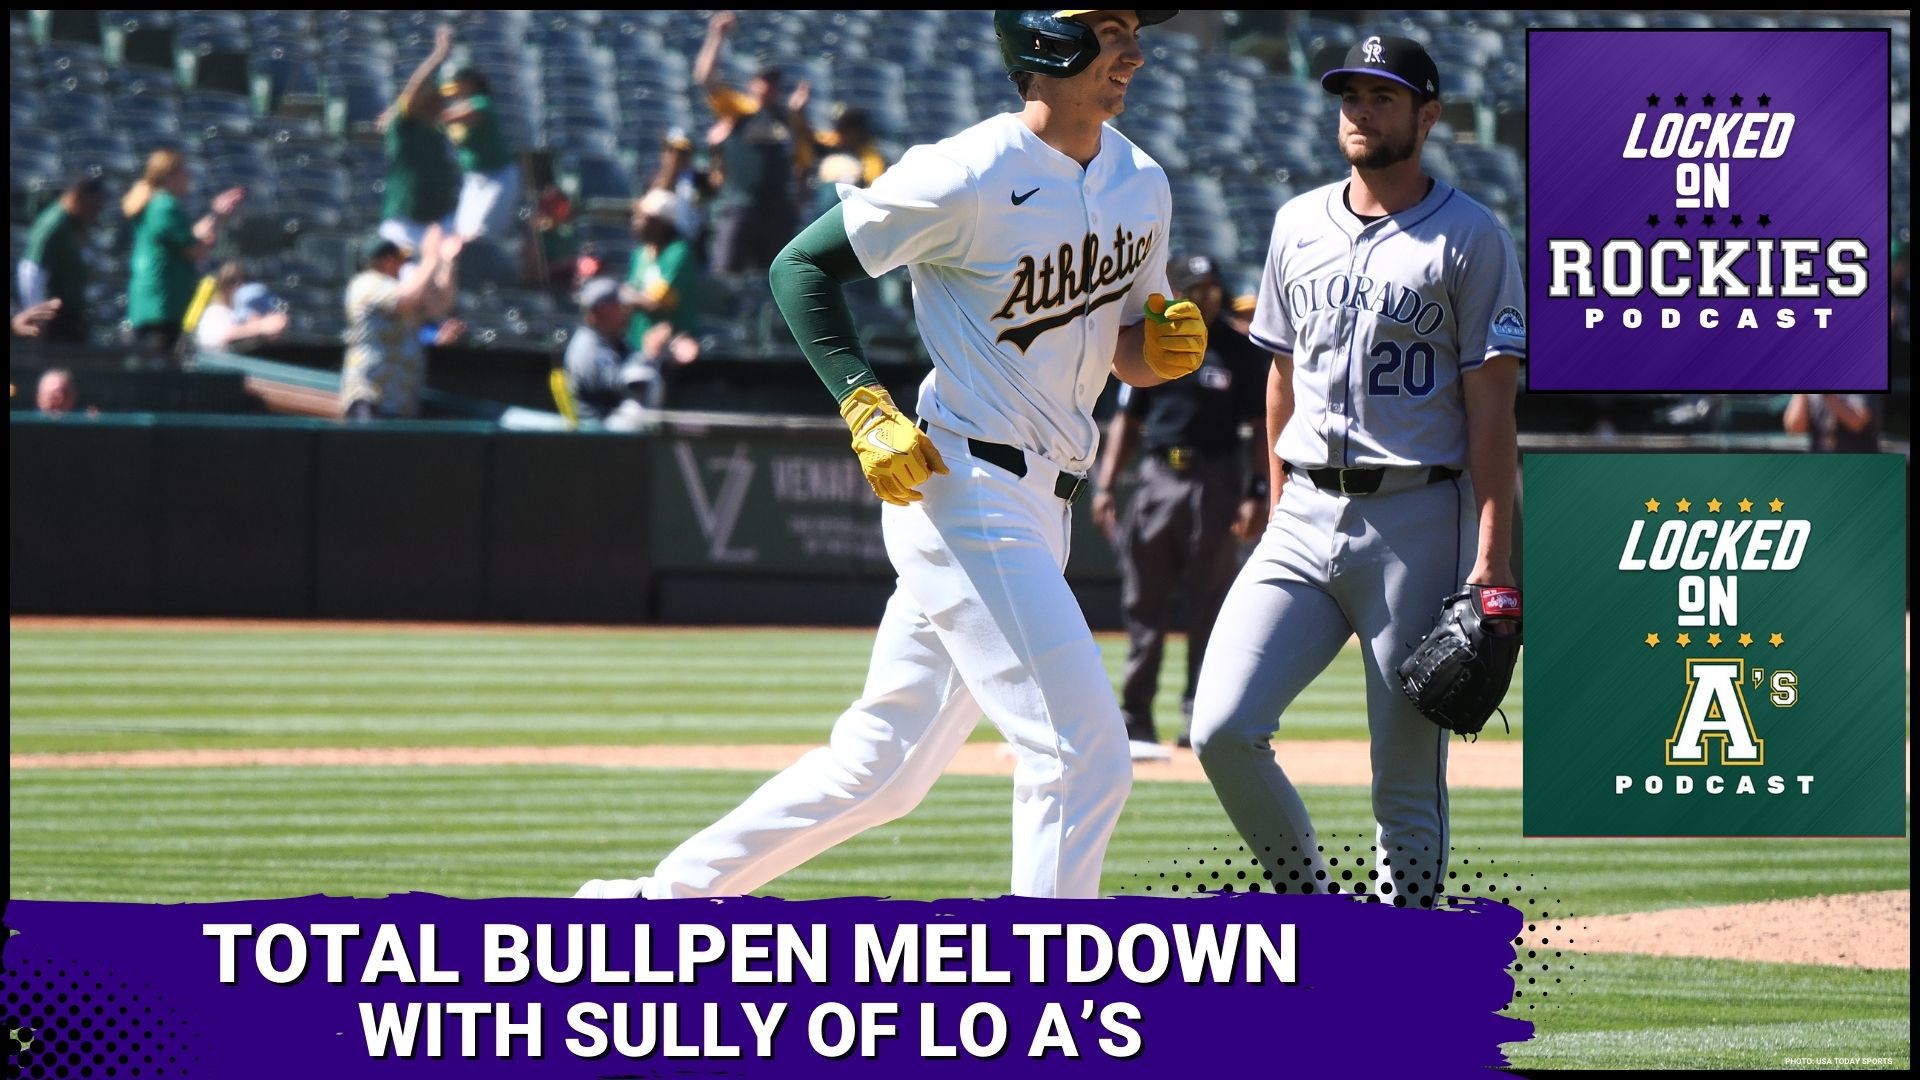 We are joined by host of Locked On A's Sully to break down a series where the Rockies bullpen blew multiple four run leads in one game.